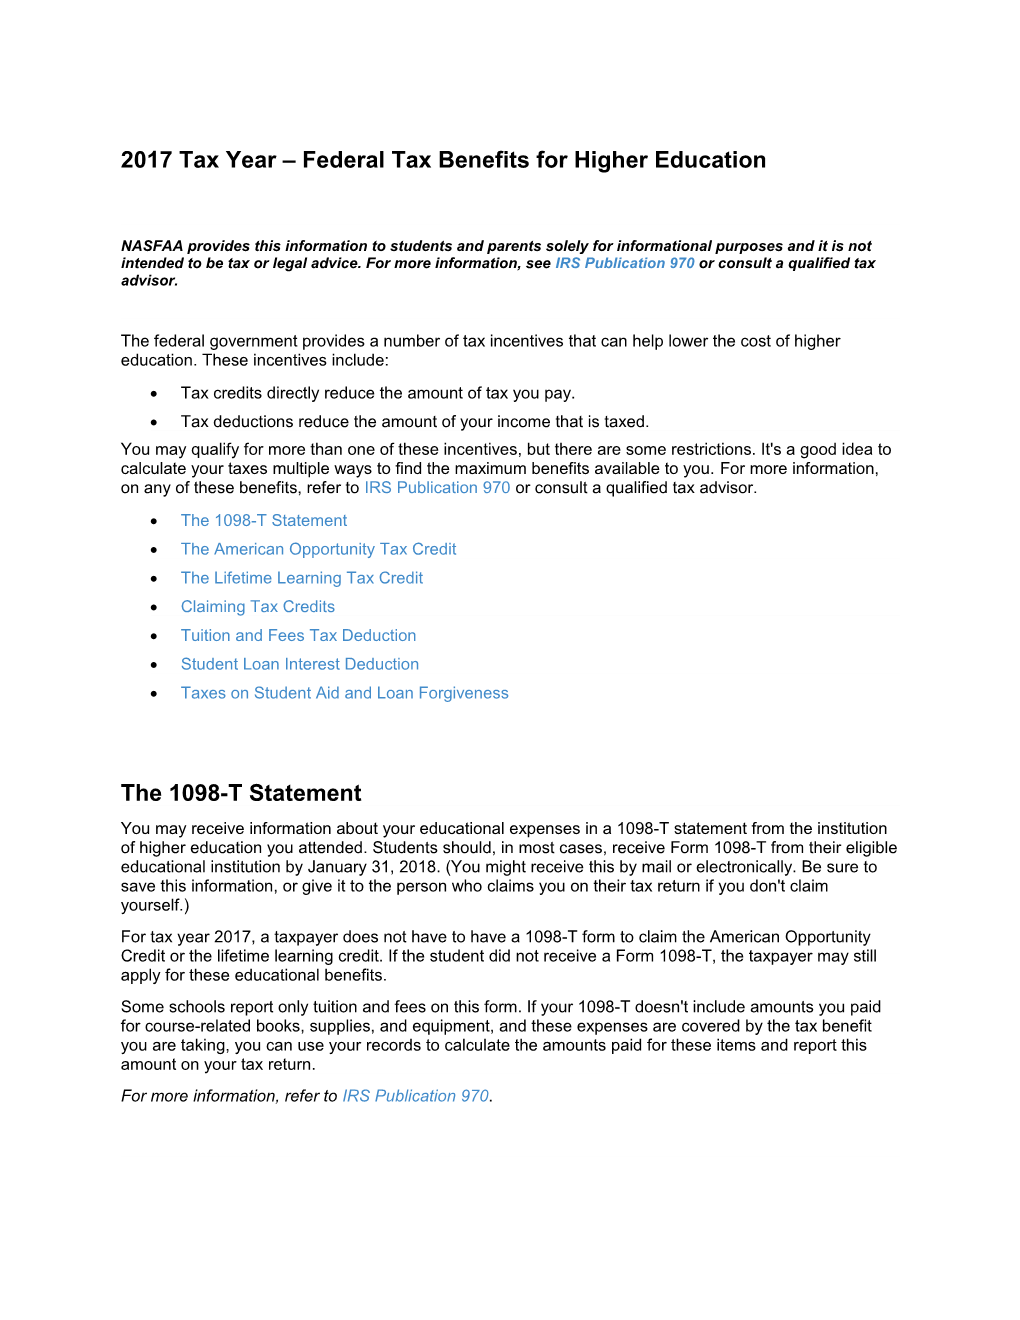 2017 Tax Year Federal Tax Benefits for Higher Education